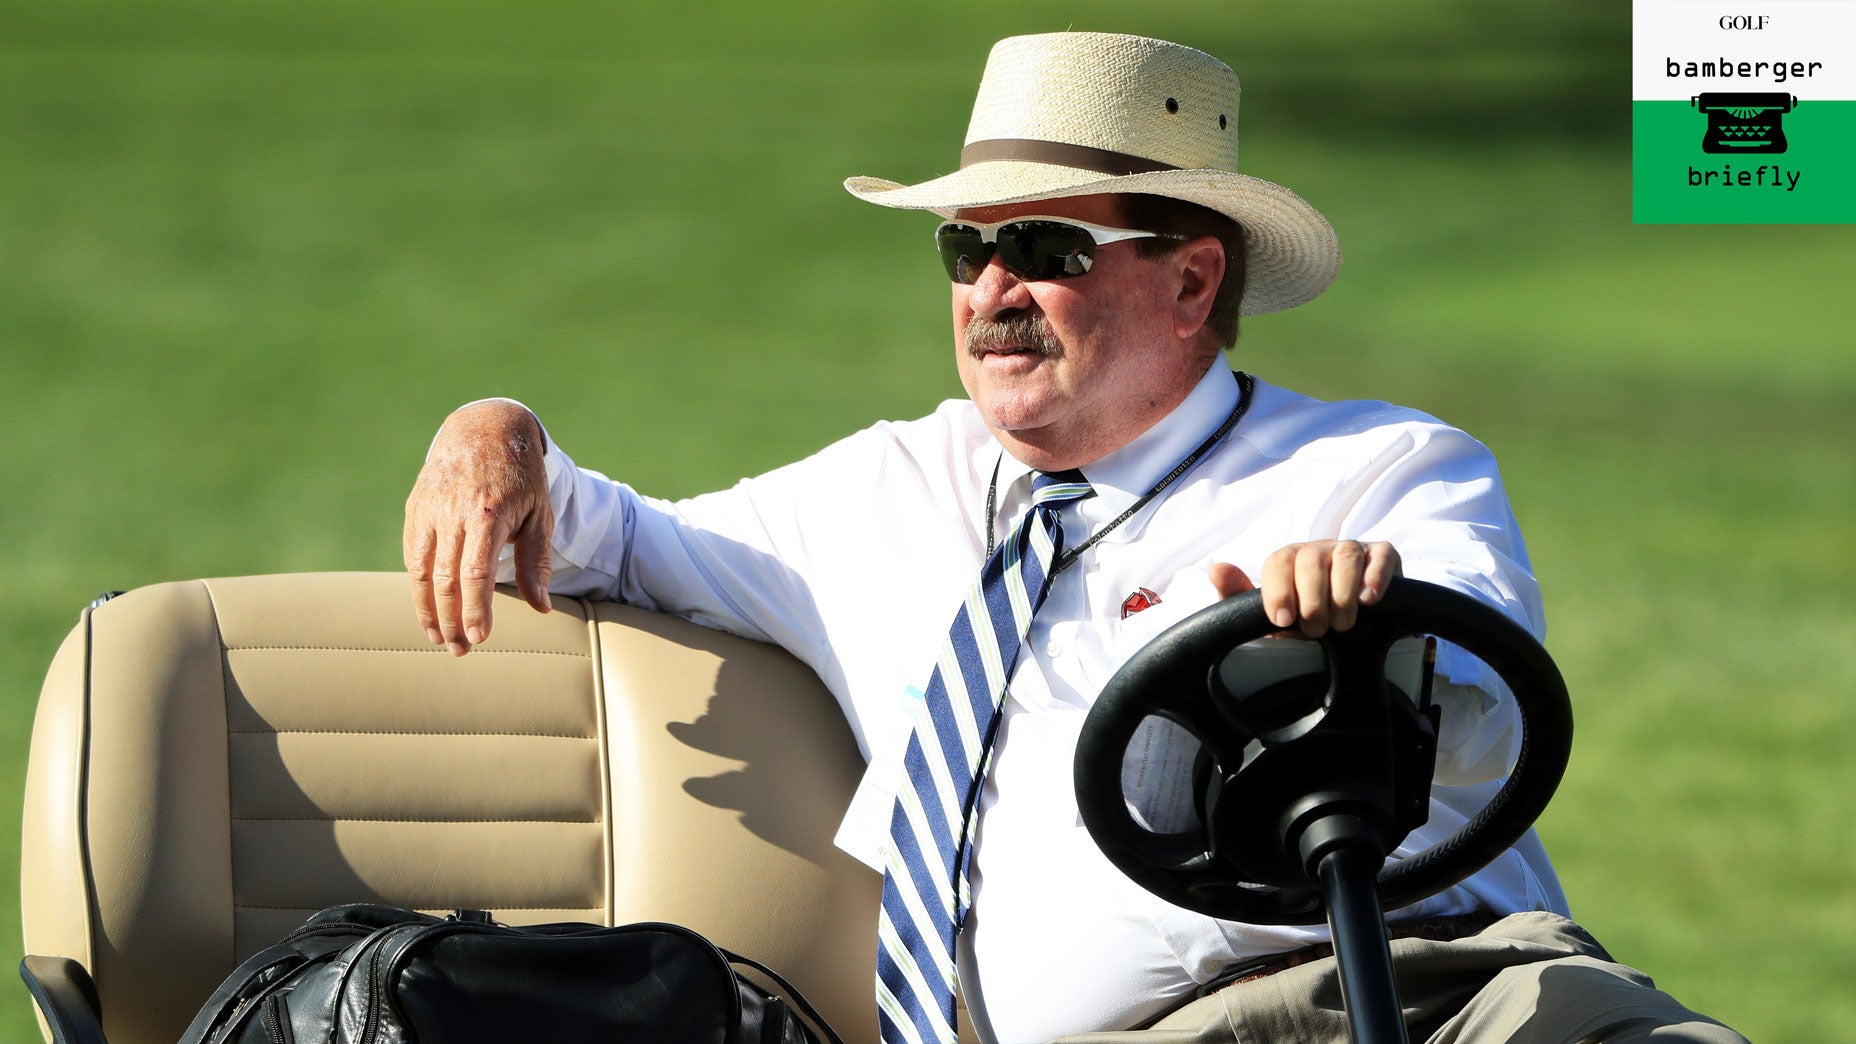 For 40 years, Tour rules official Slugger White has lived his life